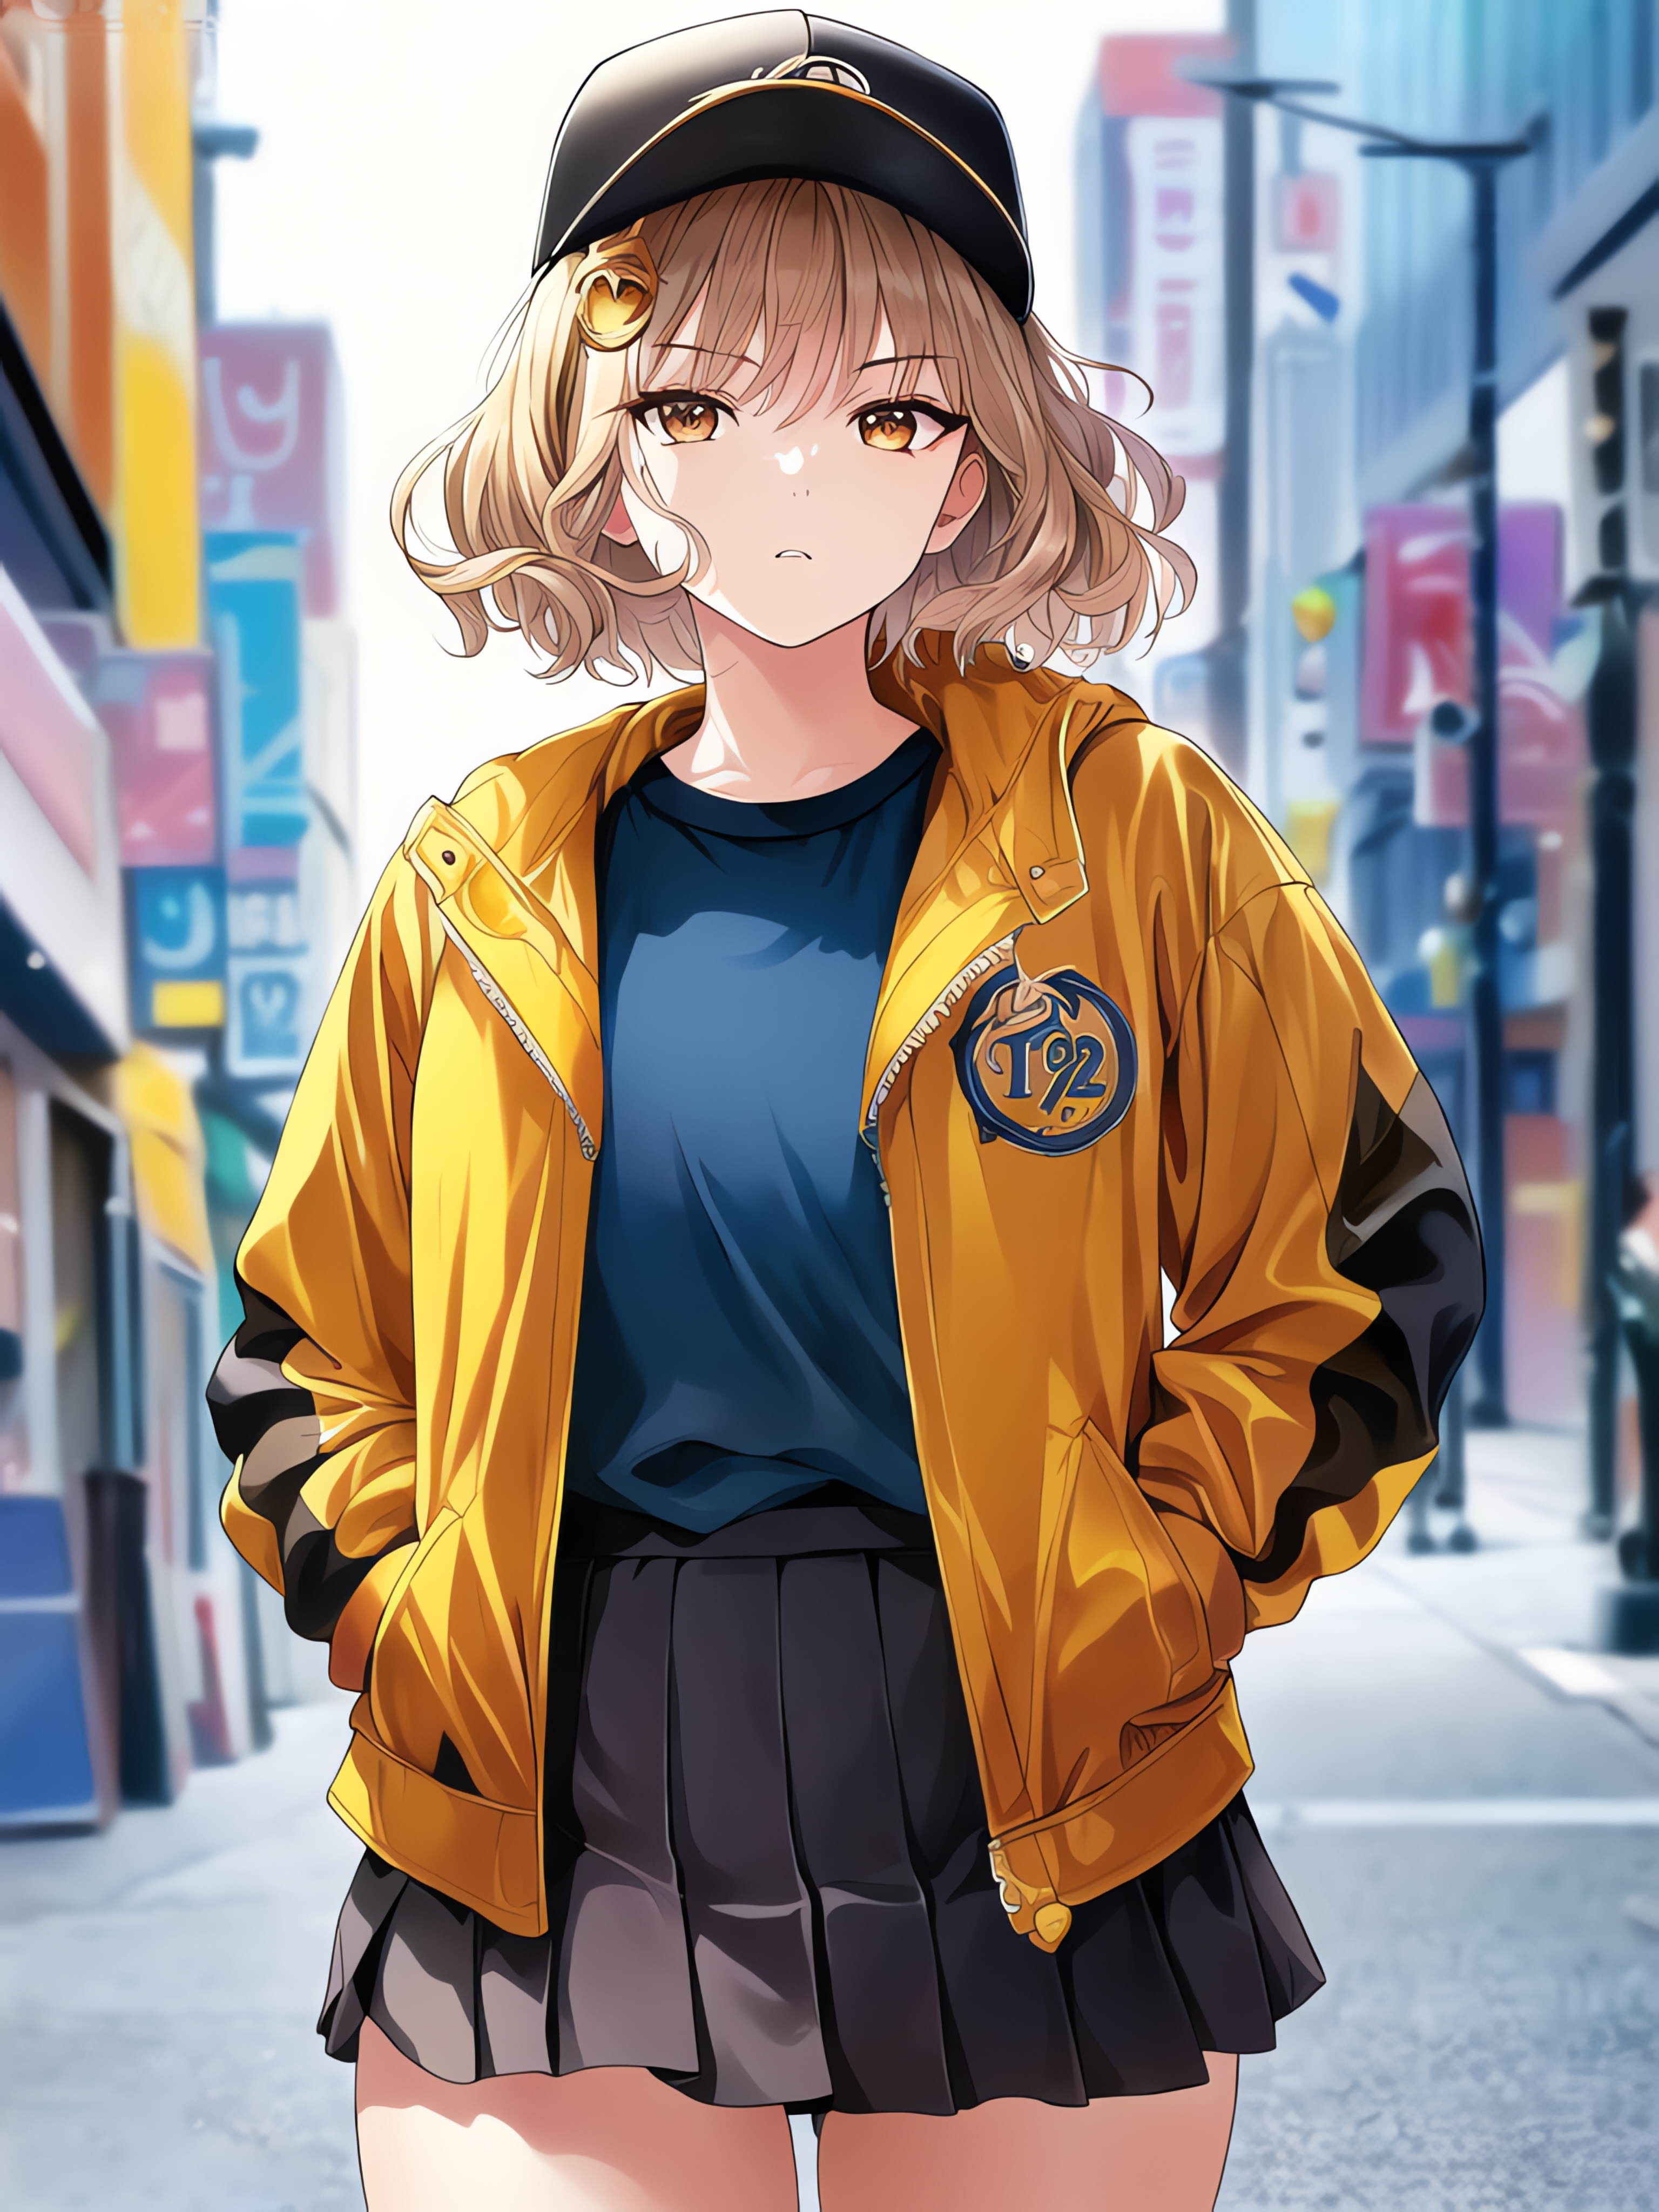 Anime Girls Blonde Short Hair Yellow Jacket Vertical Hands In Pockets Hat Looking At Viewer Yellow E 3072x4096